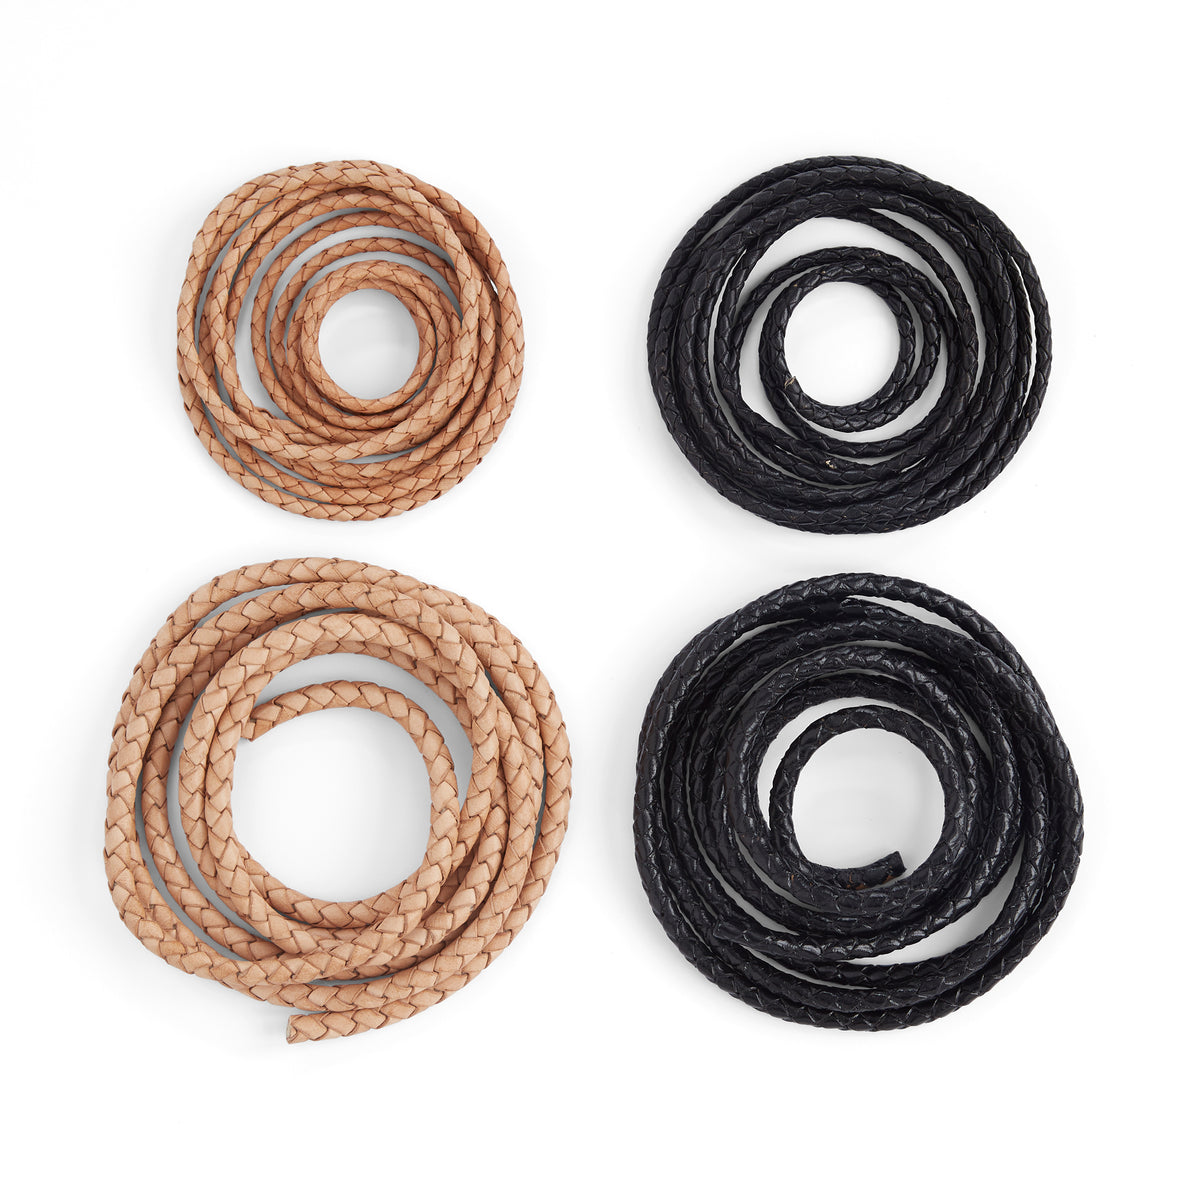 2 Yards Of 10MM Round braided leather Cord Thick synthetic leather